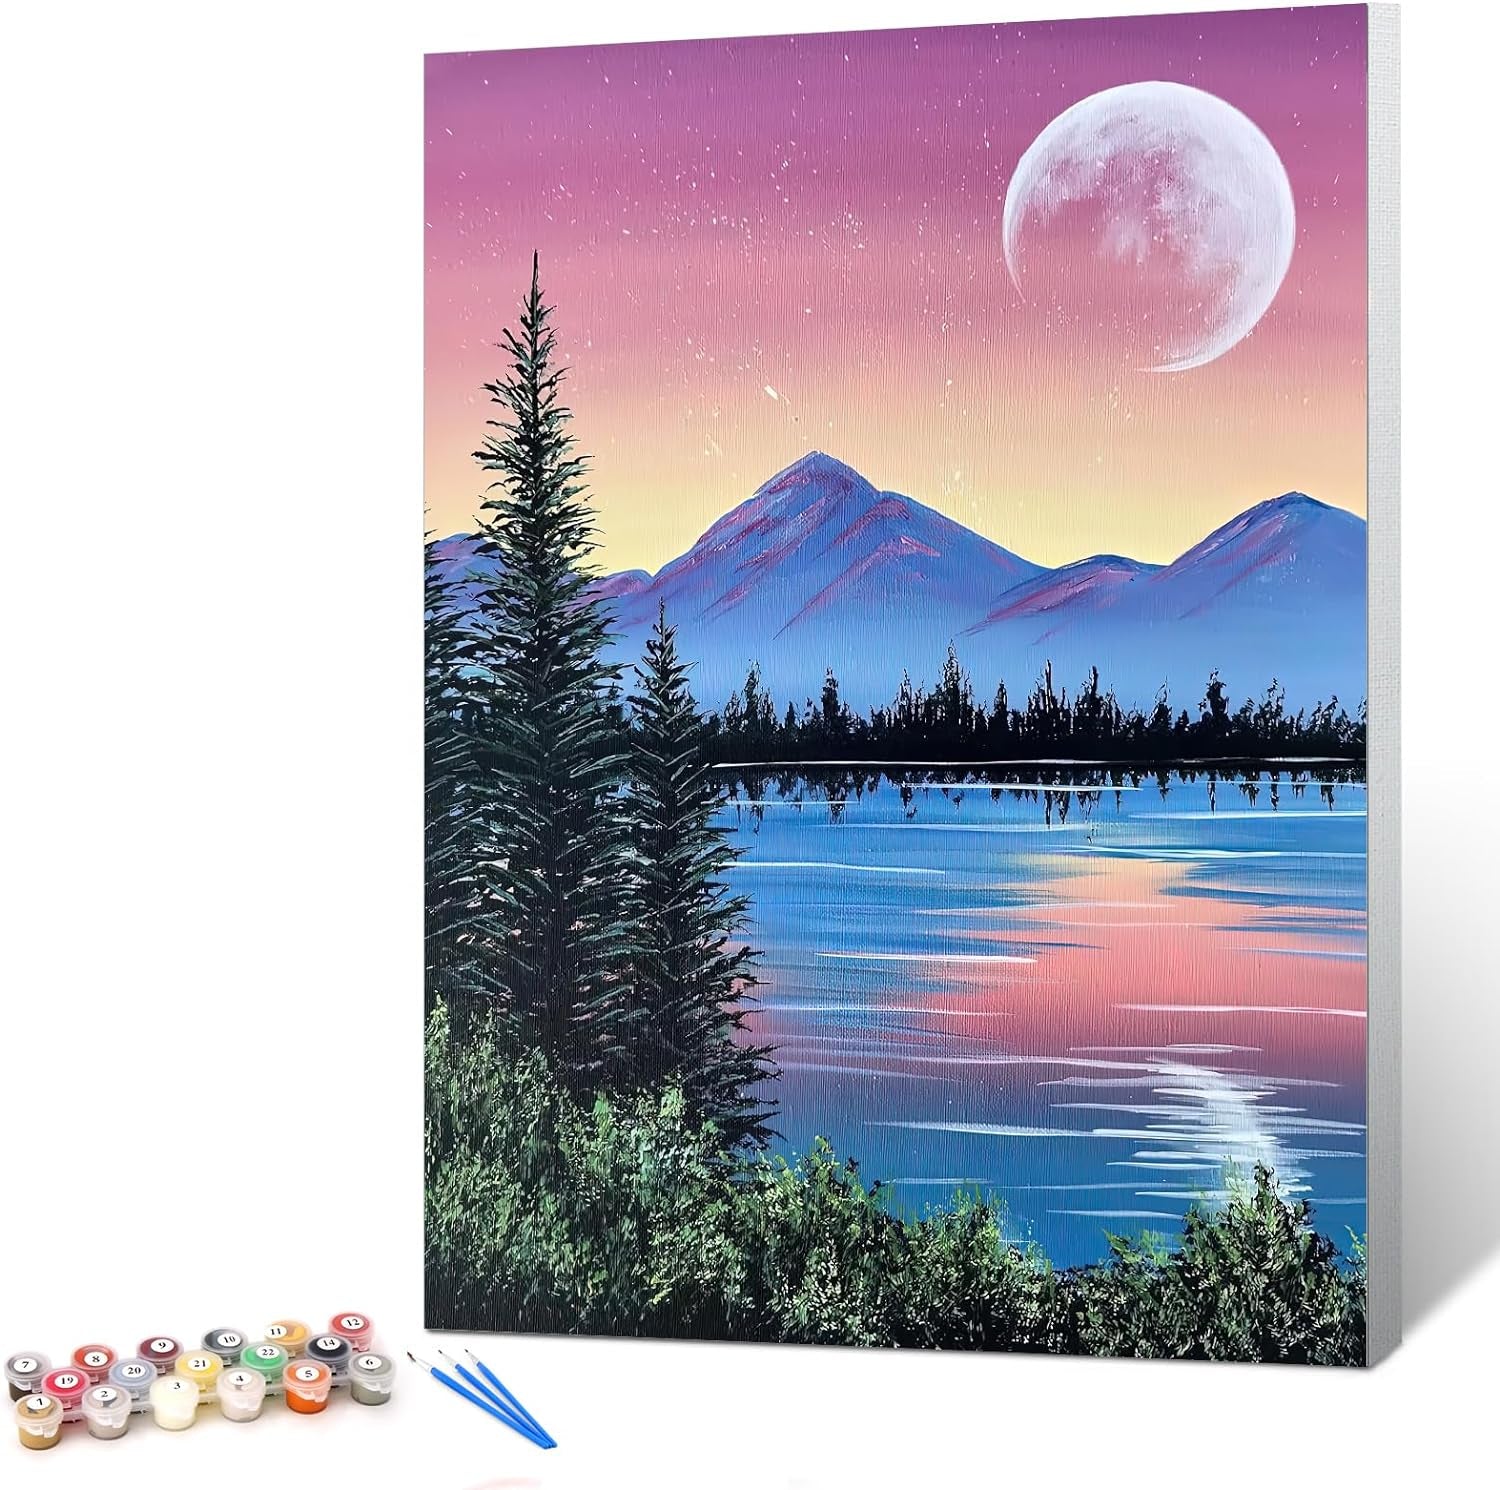 Paint by Numbers for Adults Beginner & Kids Ages 8-12 with Wooden Frame Easy Acrylic on Canvas 9X12 Inch with Paints and Brushes, Vase Flower(Include Framed)